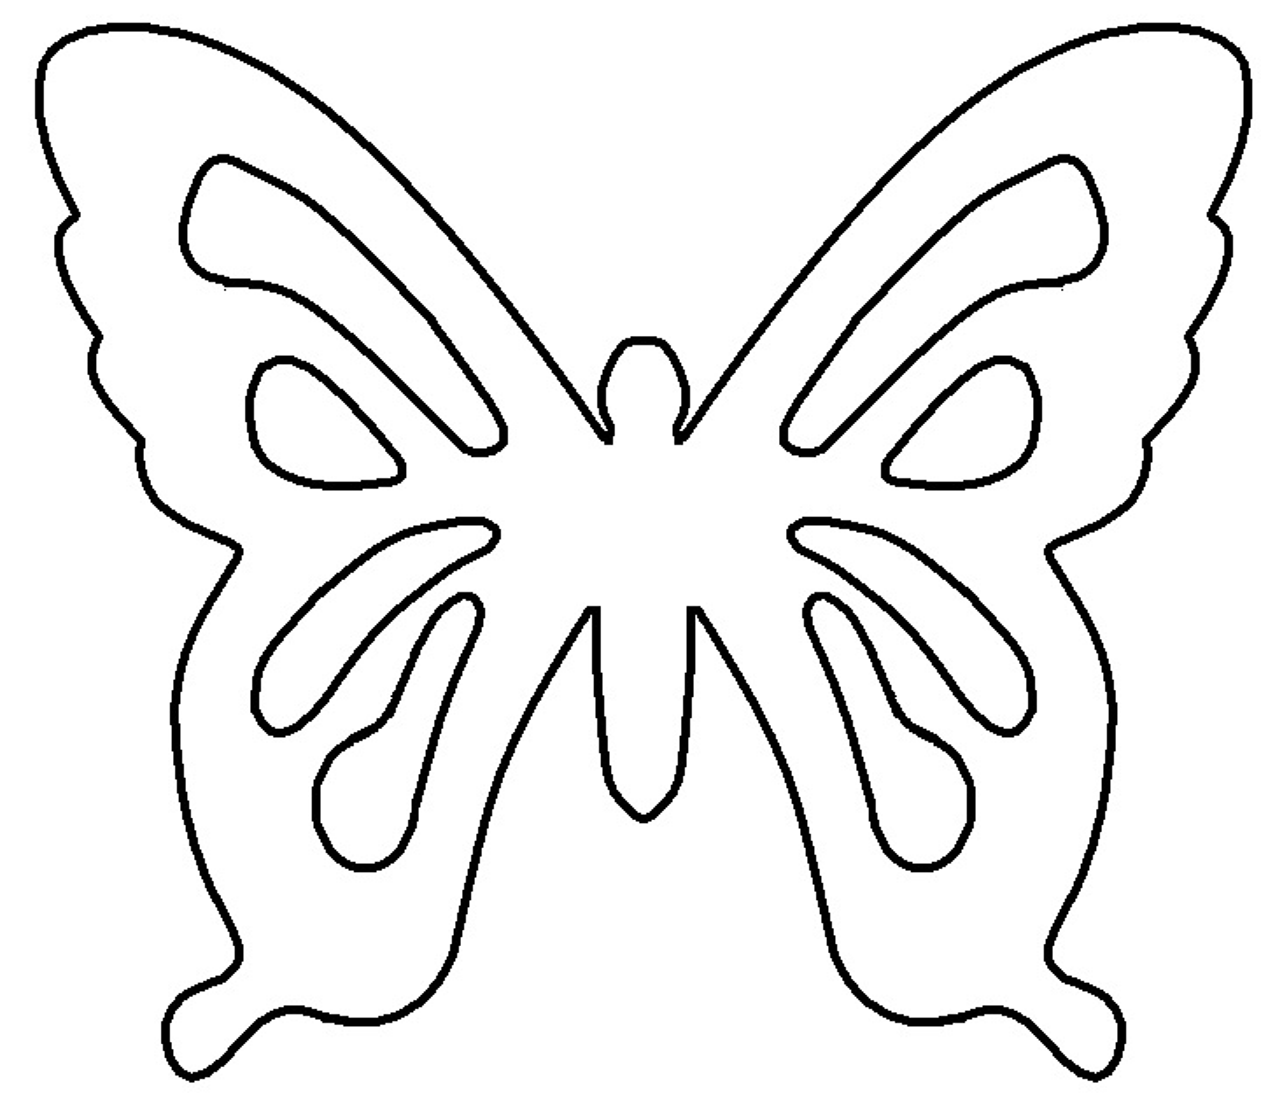 Butterfly Wing Template Printable from clipart-library.com